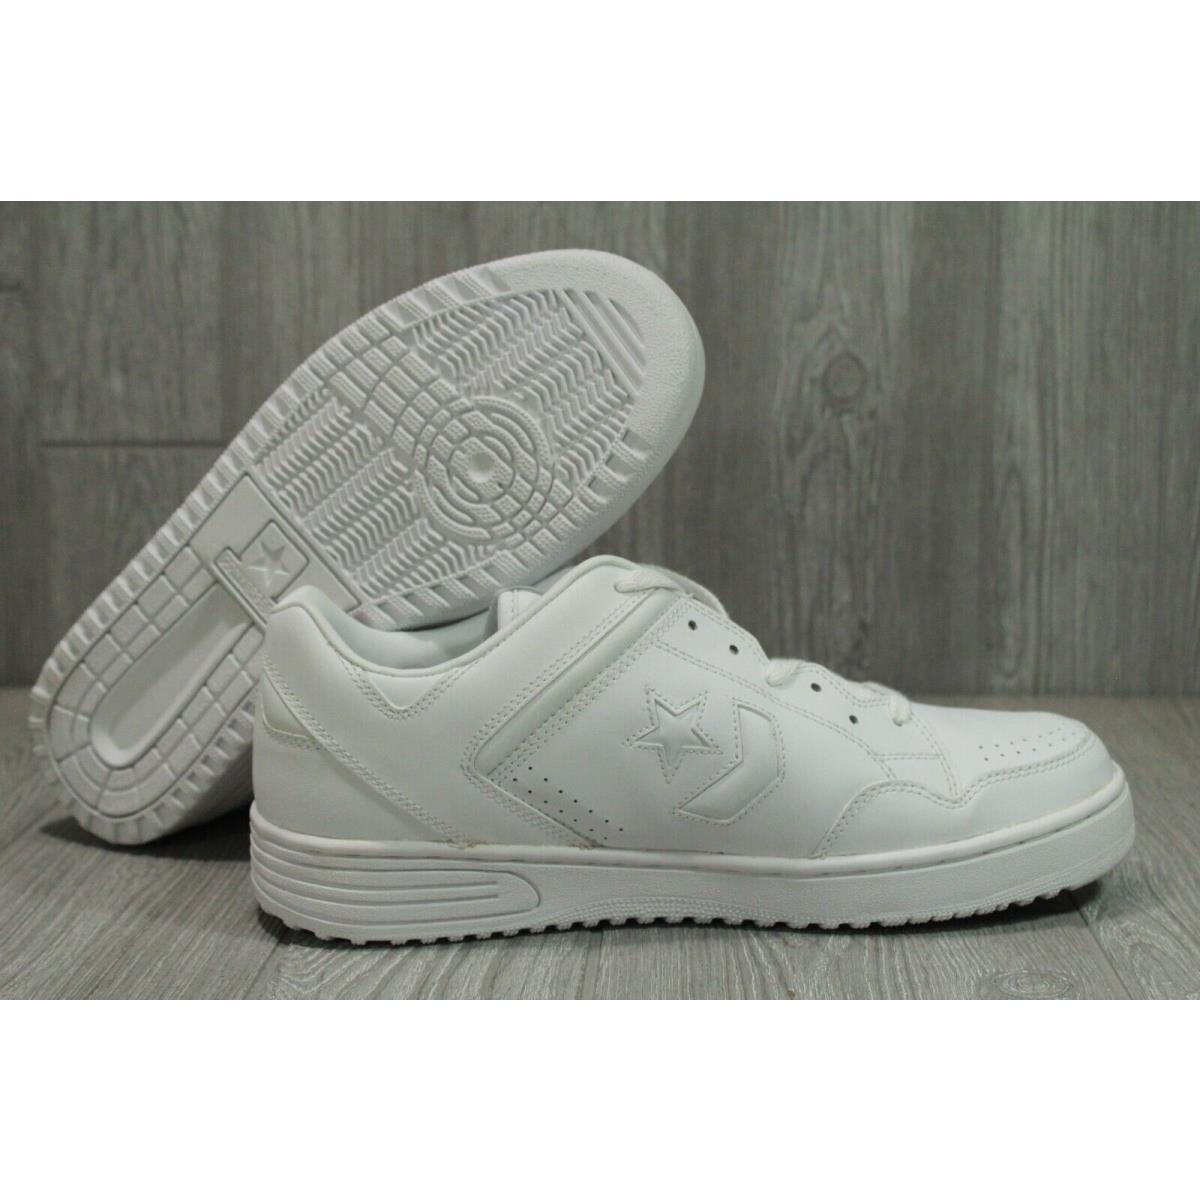 Converse shoes Weapon - White 4